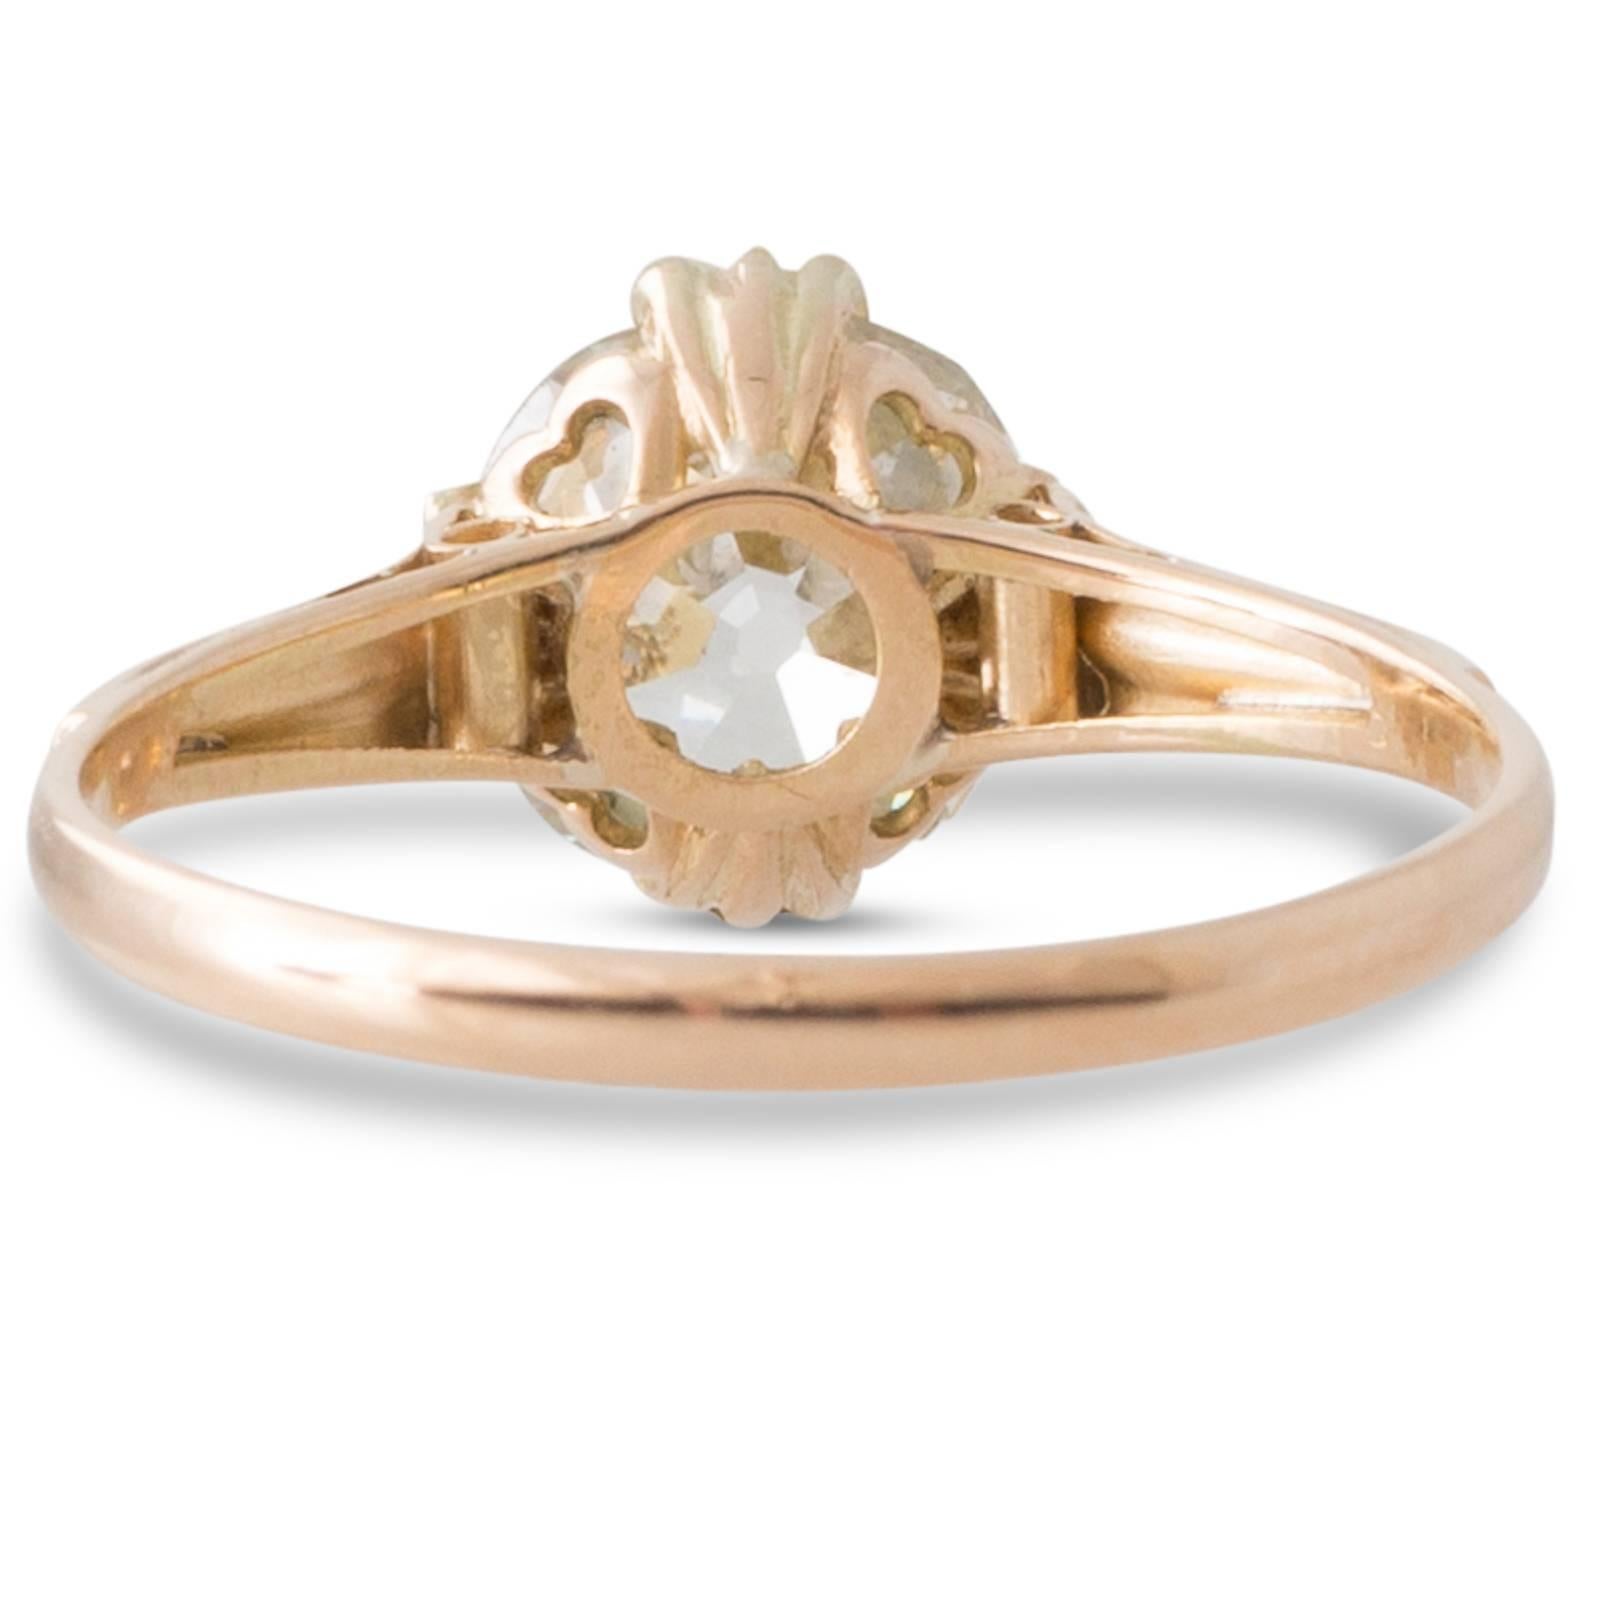 18ct yellow gold antique solitaire ring with a GIA certified 1.81ct cushion cut diamond graded as colour M clarity VS2 set in four triple claws above the heart shaped gallery to upswept grooved shoulders and a plain polished band. Total Diamond